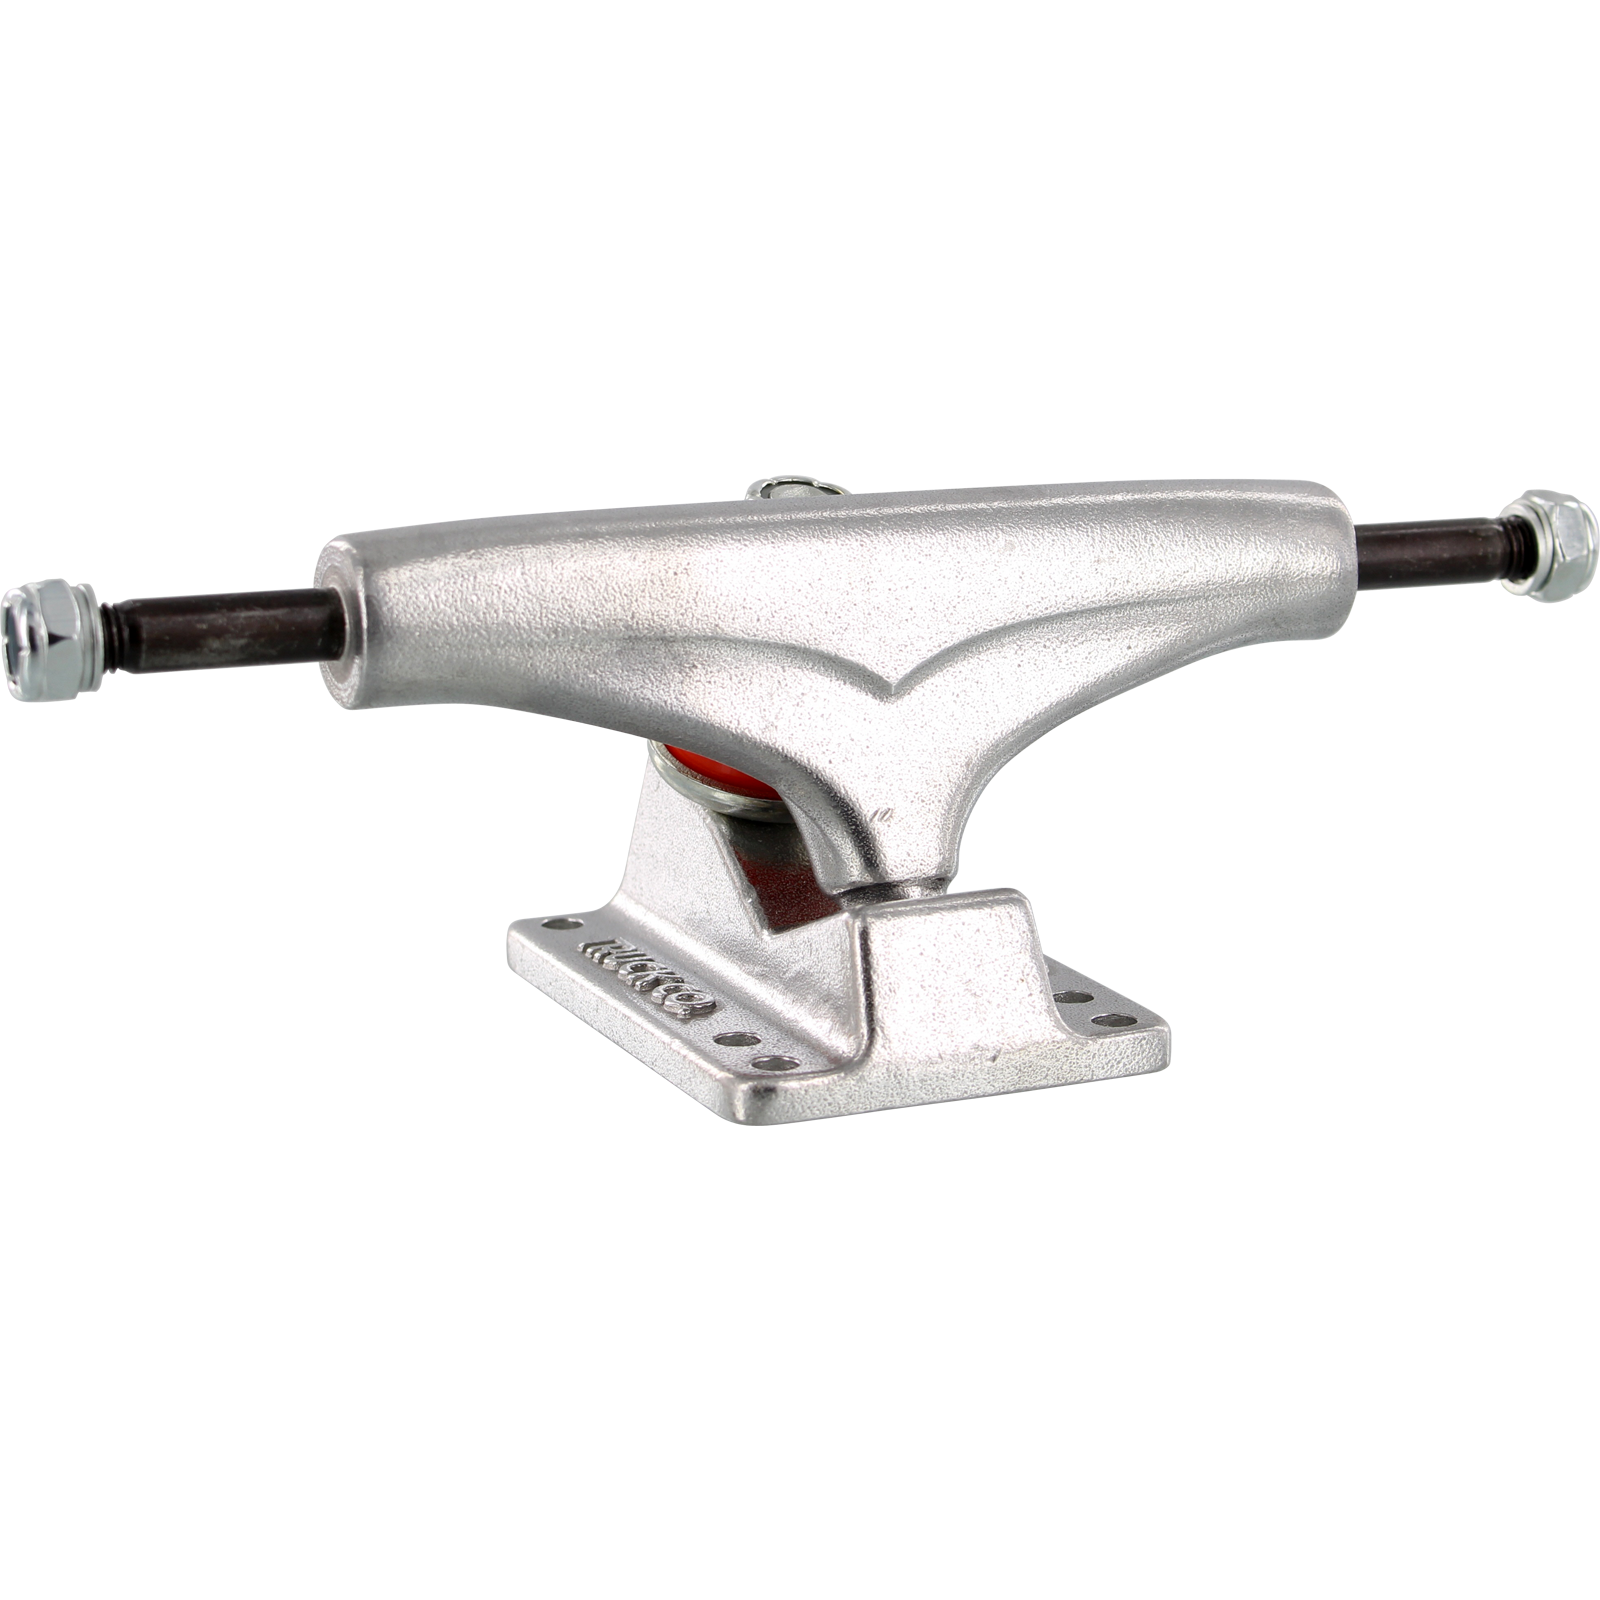 Gullwing Shadow 8.0 Silver Truck Skateboard Trucks (Set of 2) | Universo Extremo Boards Skate & Surf